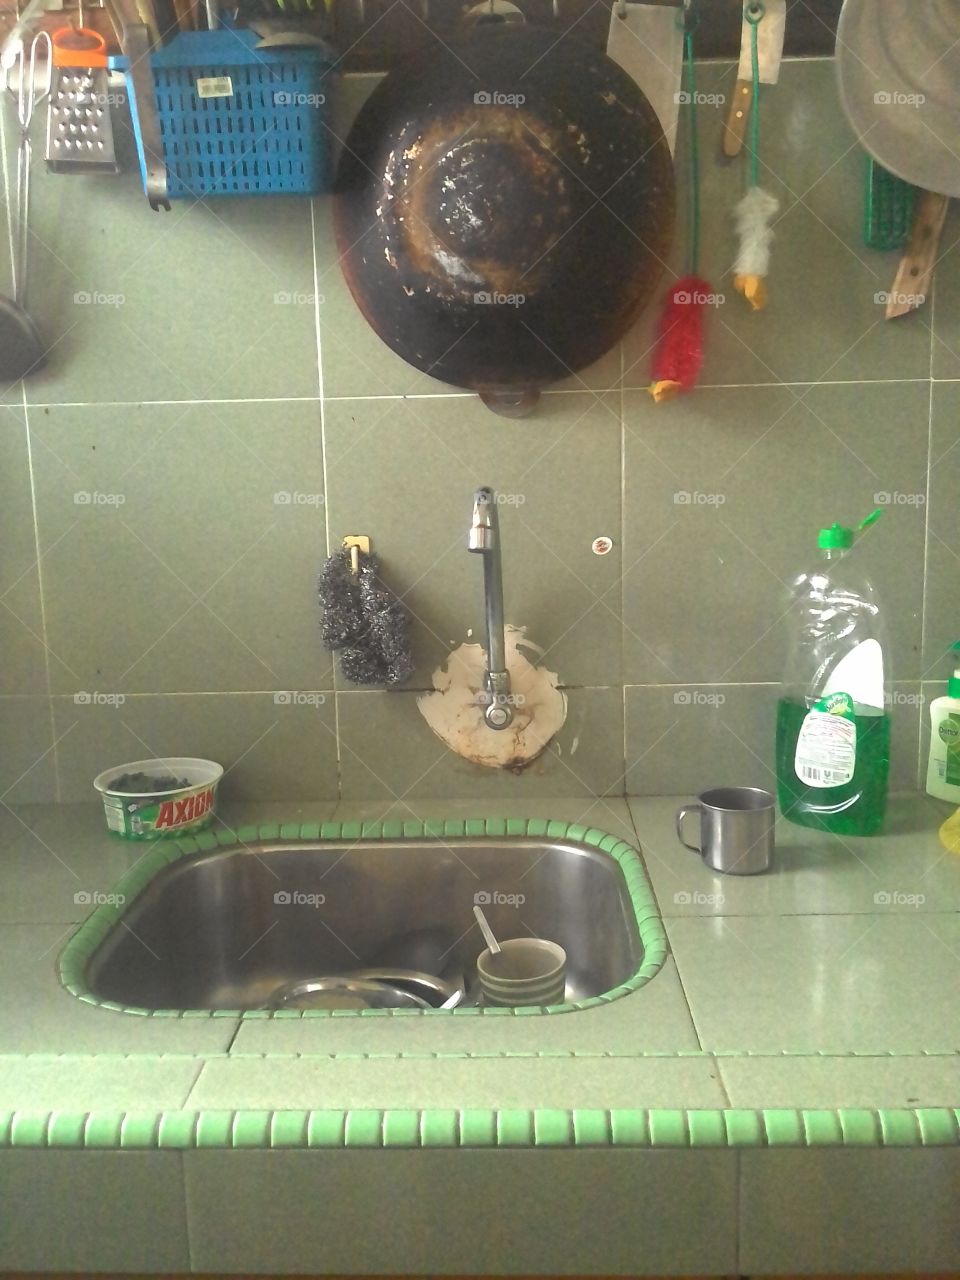 Typical Asian Kitchen Sink.

The candid shot depicts typical design of Asian kitchen sink in common household; showing the everyday household structure mothers need to face to get their job done.